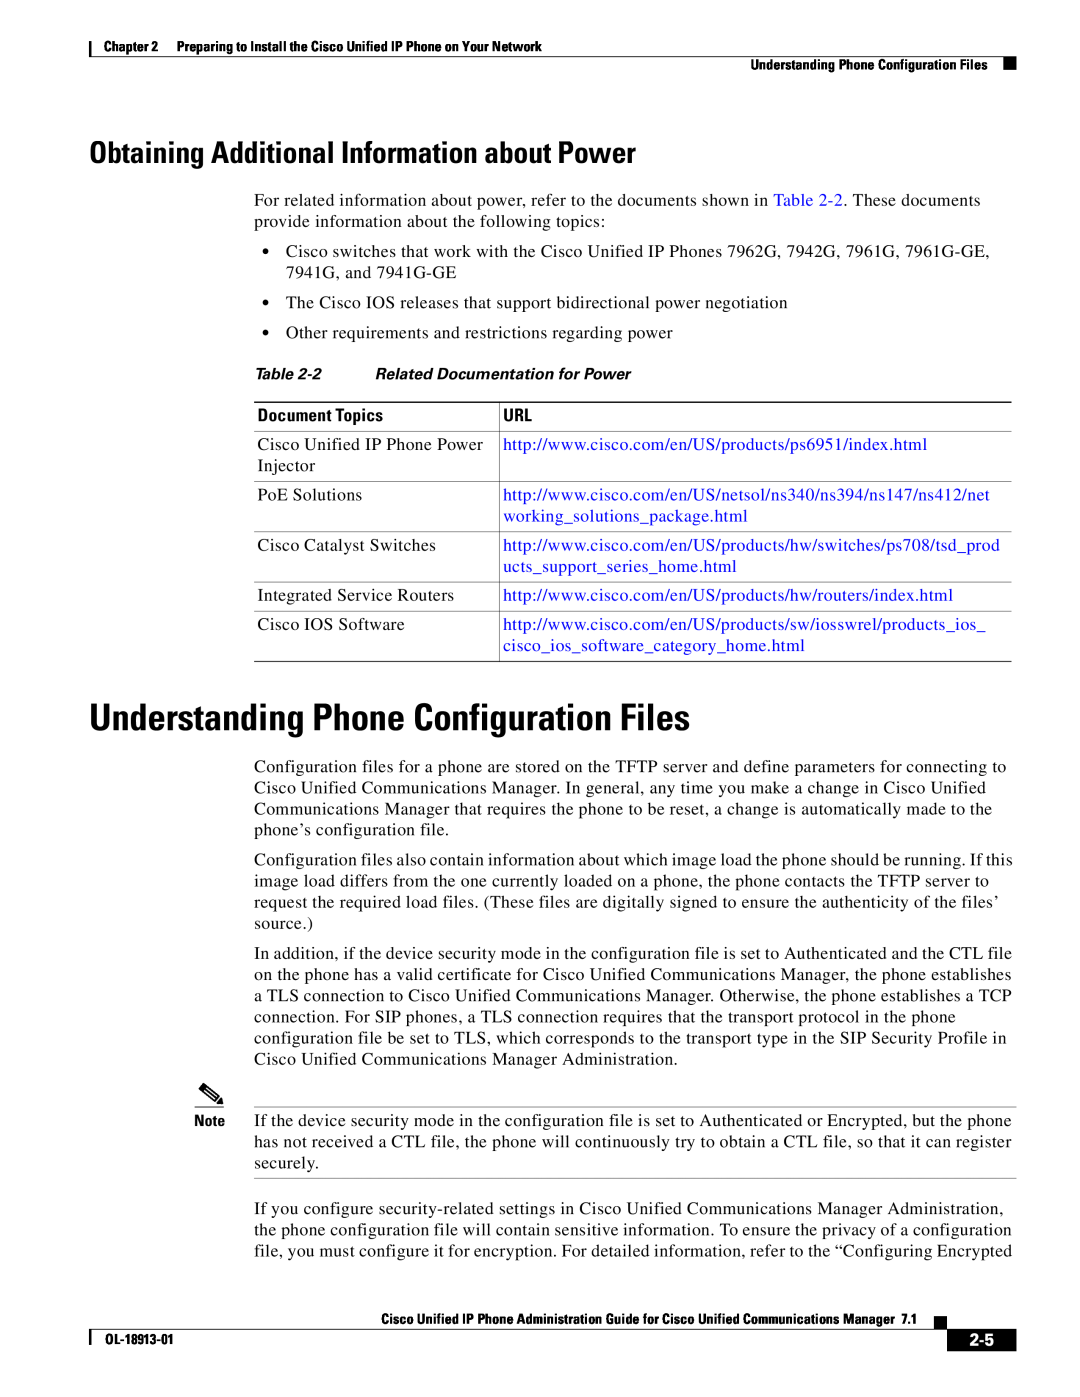 Cisco Systems 71 manual Understanding Phone Configuration Files, Obtaining Additional Information about Power, Injector 